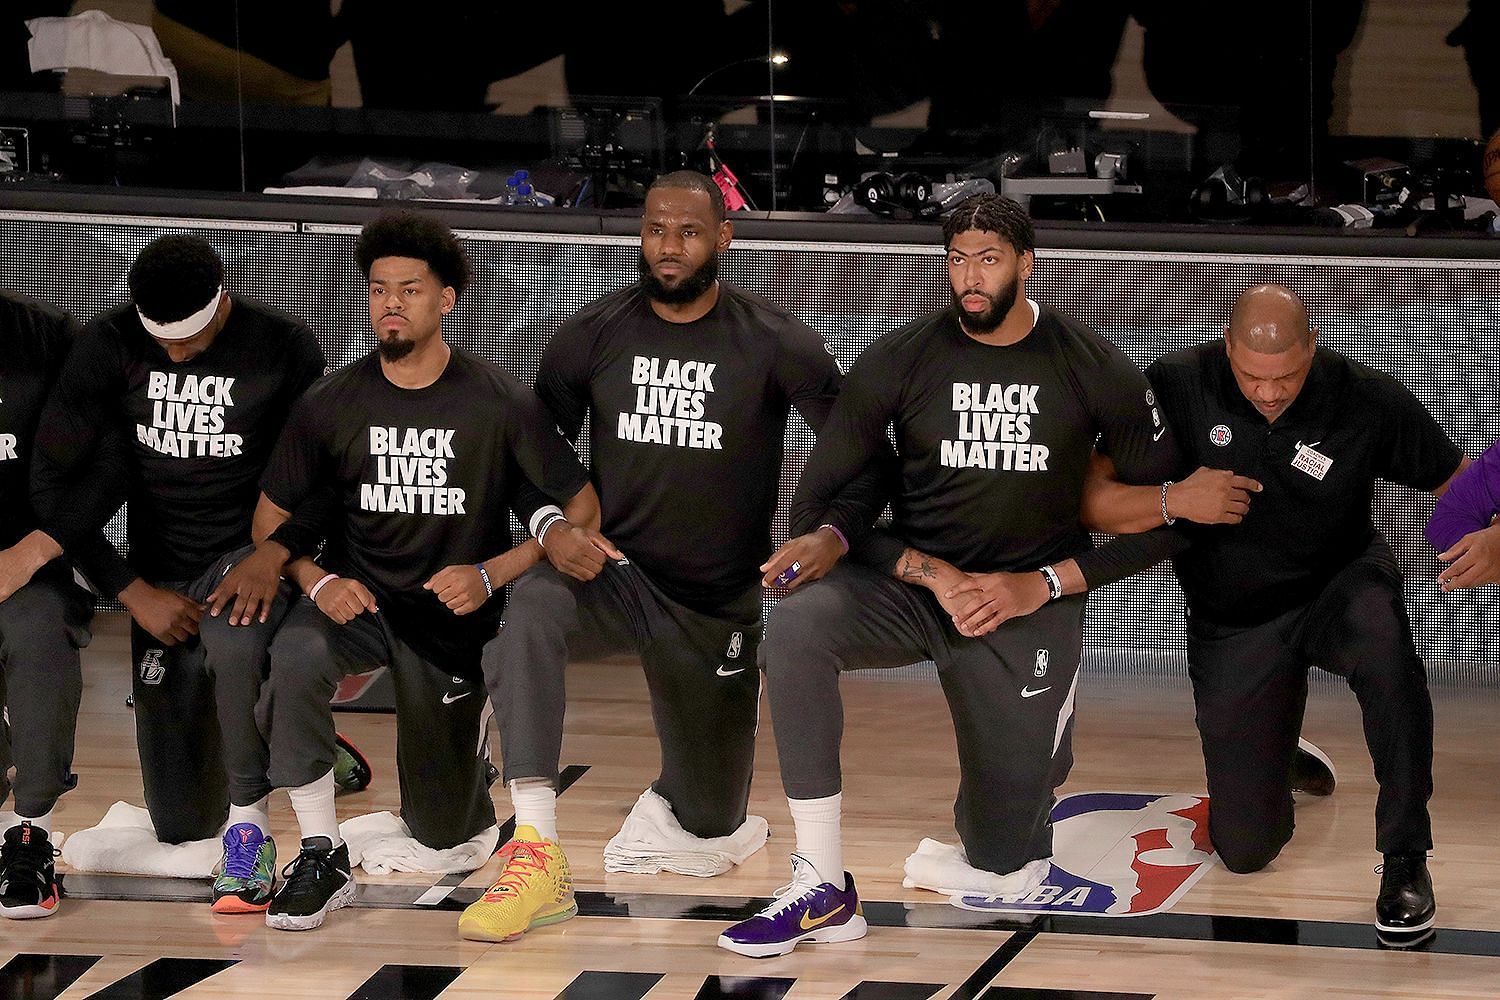 The Black Lives Matter movement is very much alive in the NBA. [Photo: People.com]